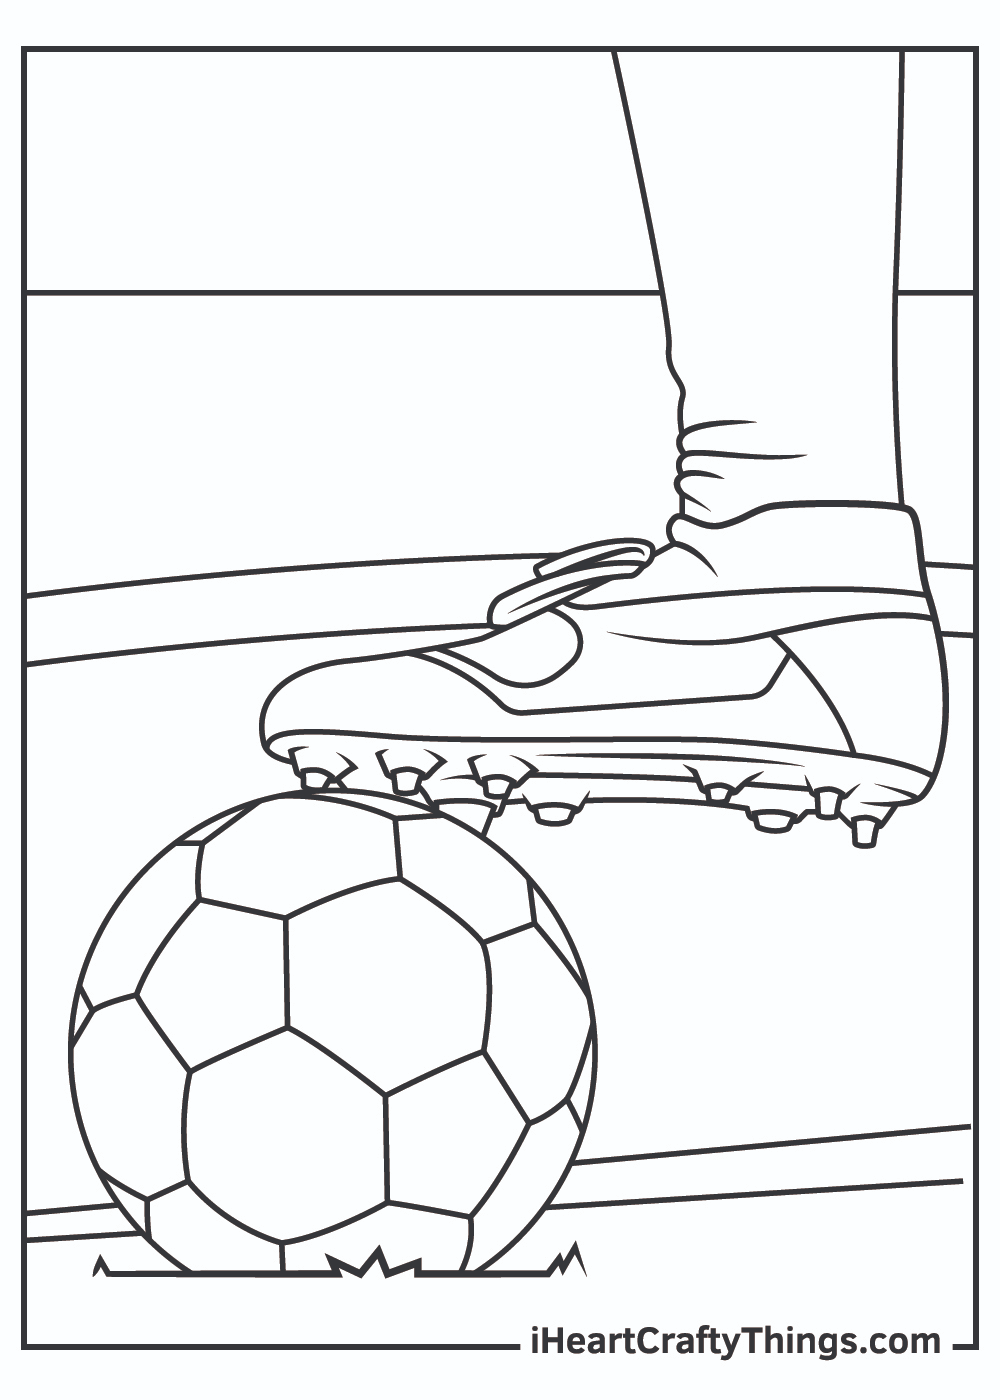 Soccer coloring pages sports coloring pages coloring pages soccer drawing